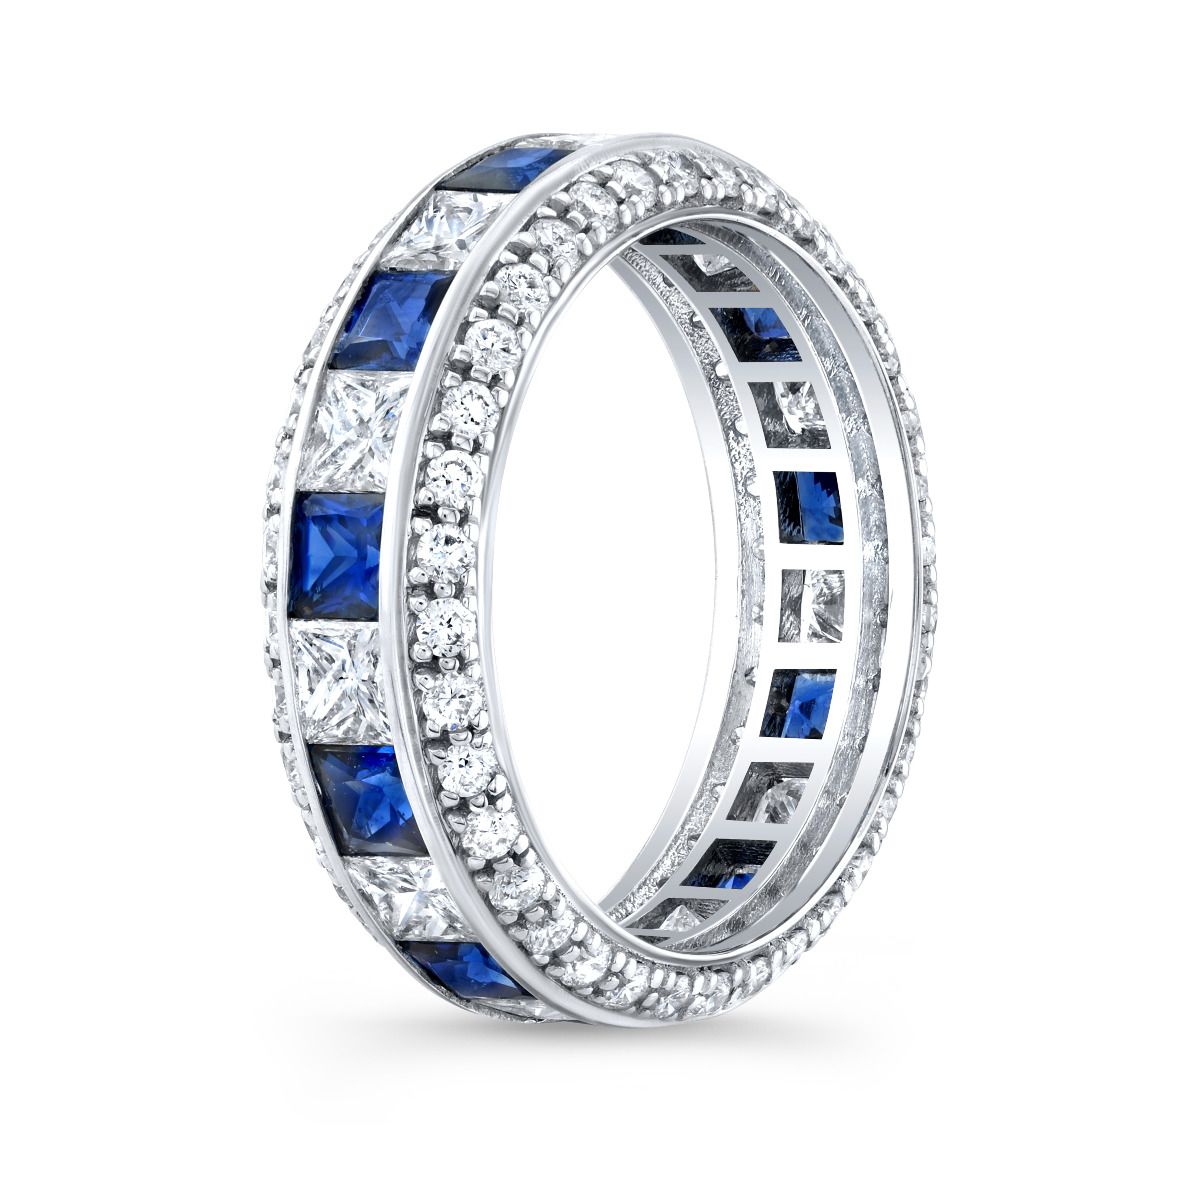 Elegant and gleaming Princess cut Diamonds and Blue Sapphire that goes all the way around is beautifully set on this Channel set design